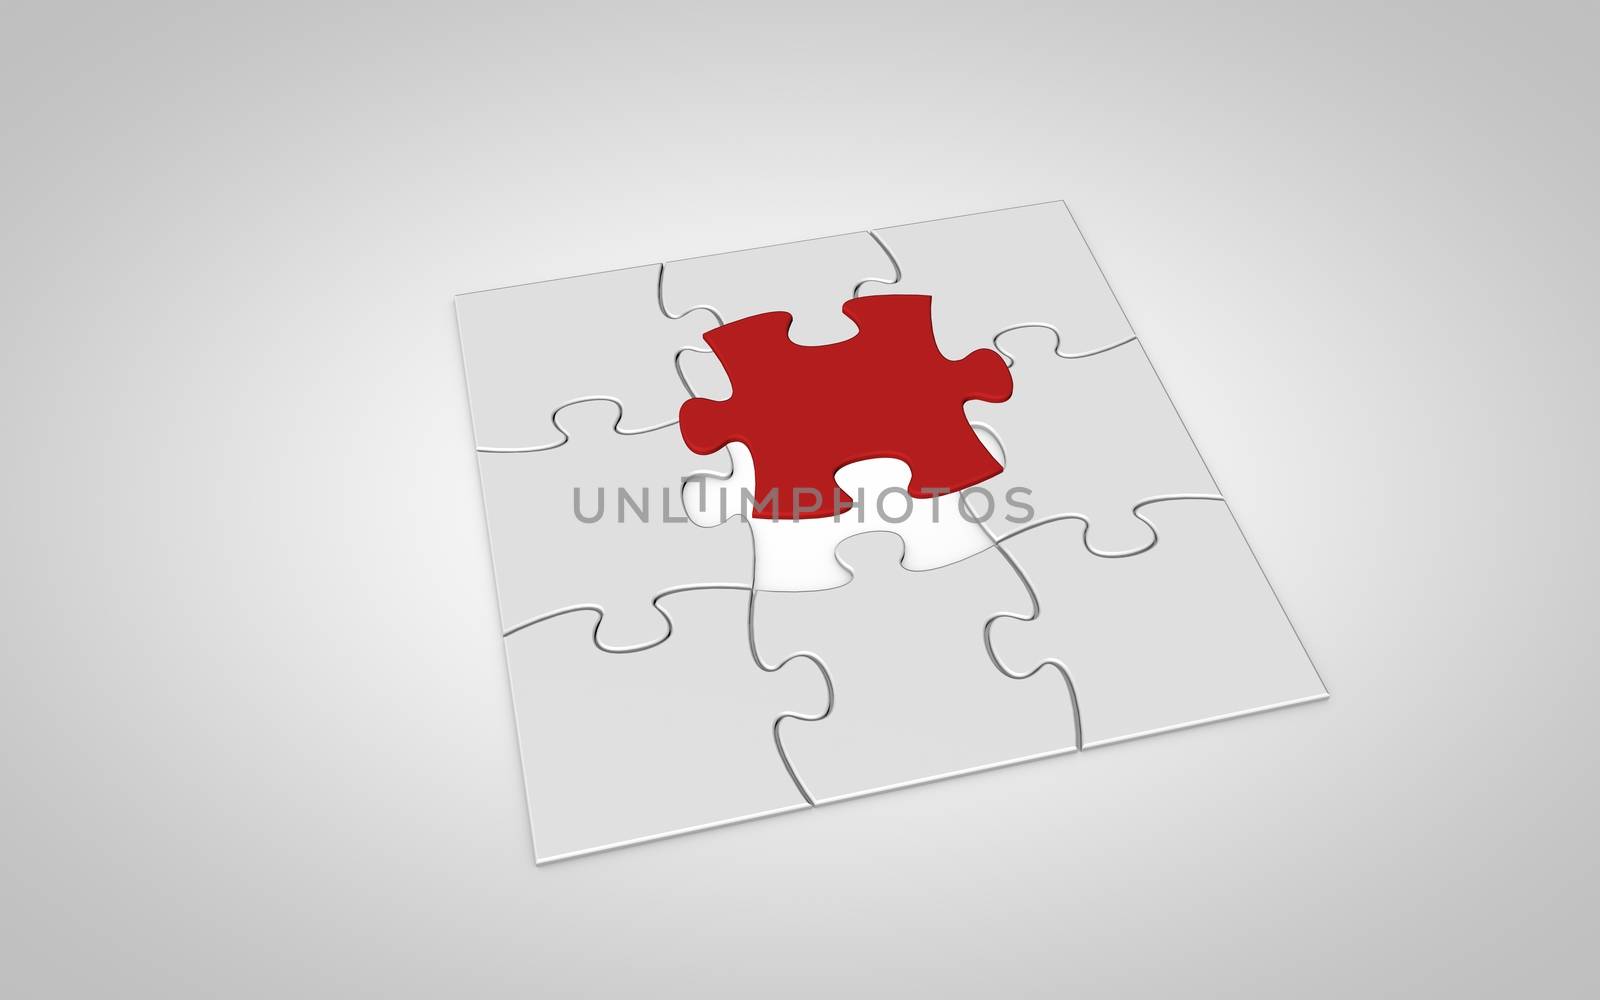 Nine puzzle pieces falling from top to white background. Final red puzzle piece falls into place.